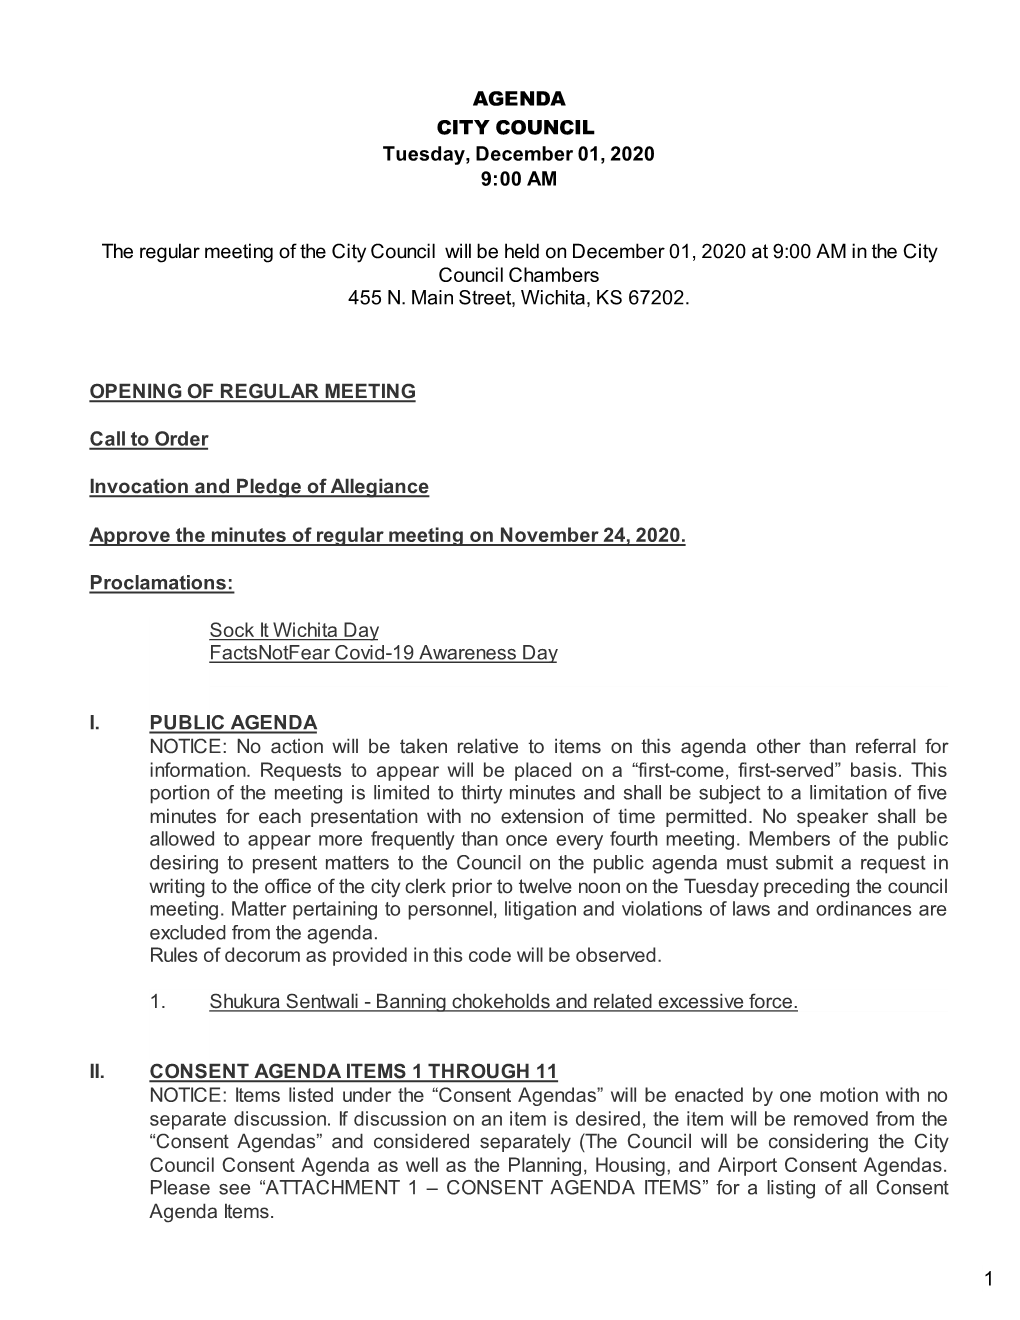 12-01-2020 Council Agenda Packet